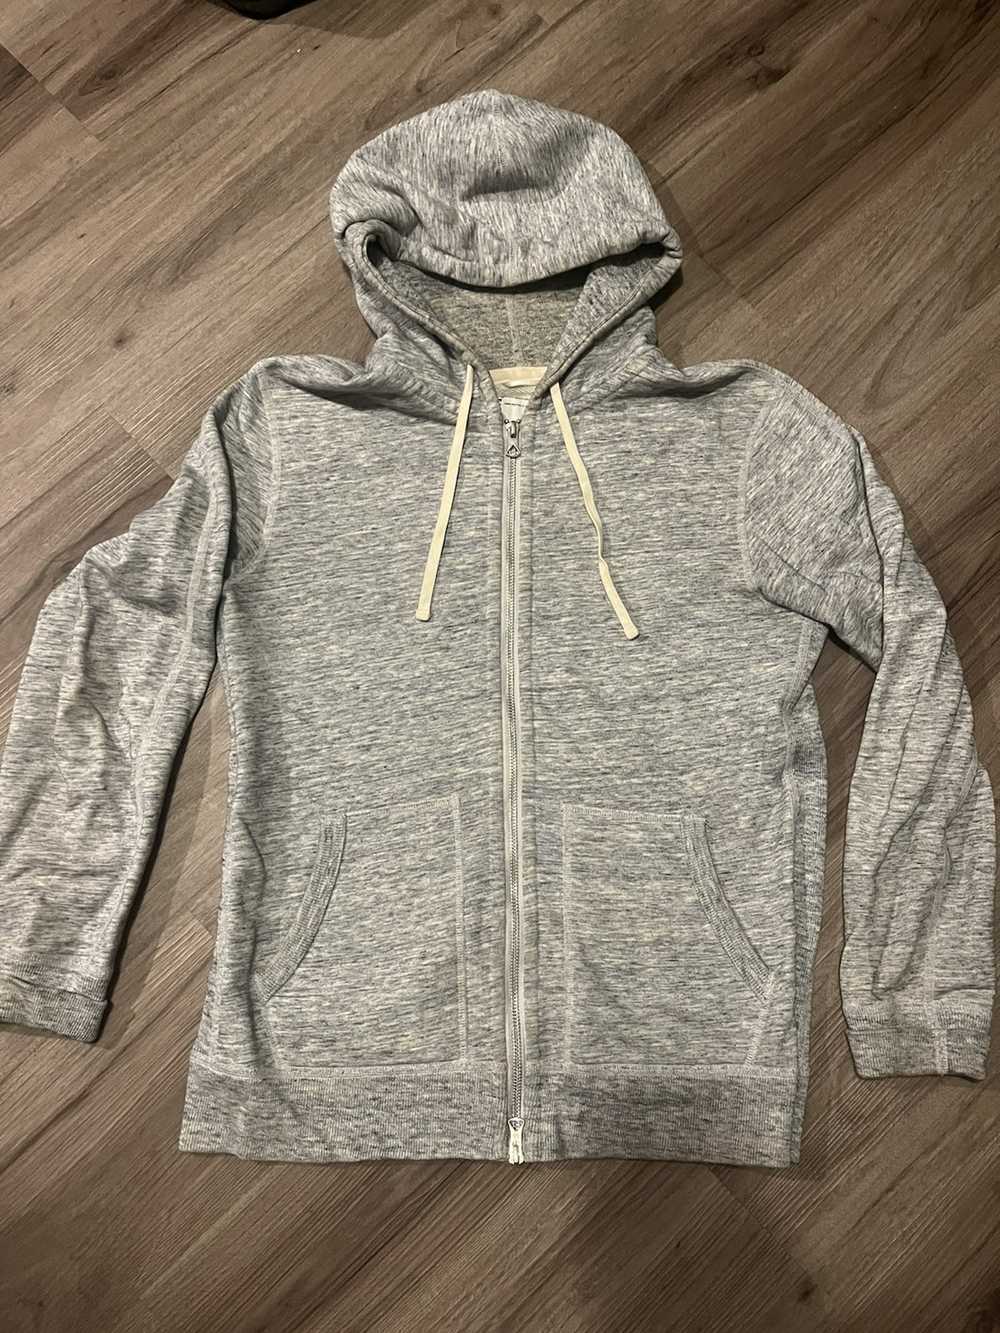 Reigning Champ Reigning champ zip hoodie - image 1